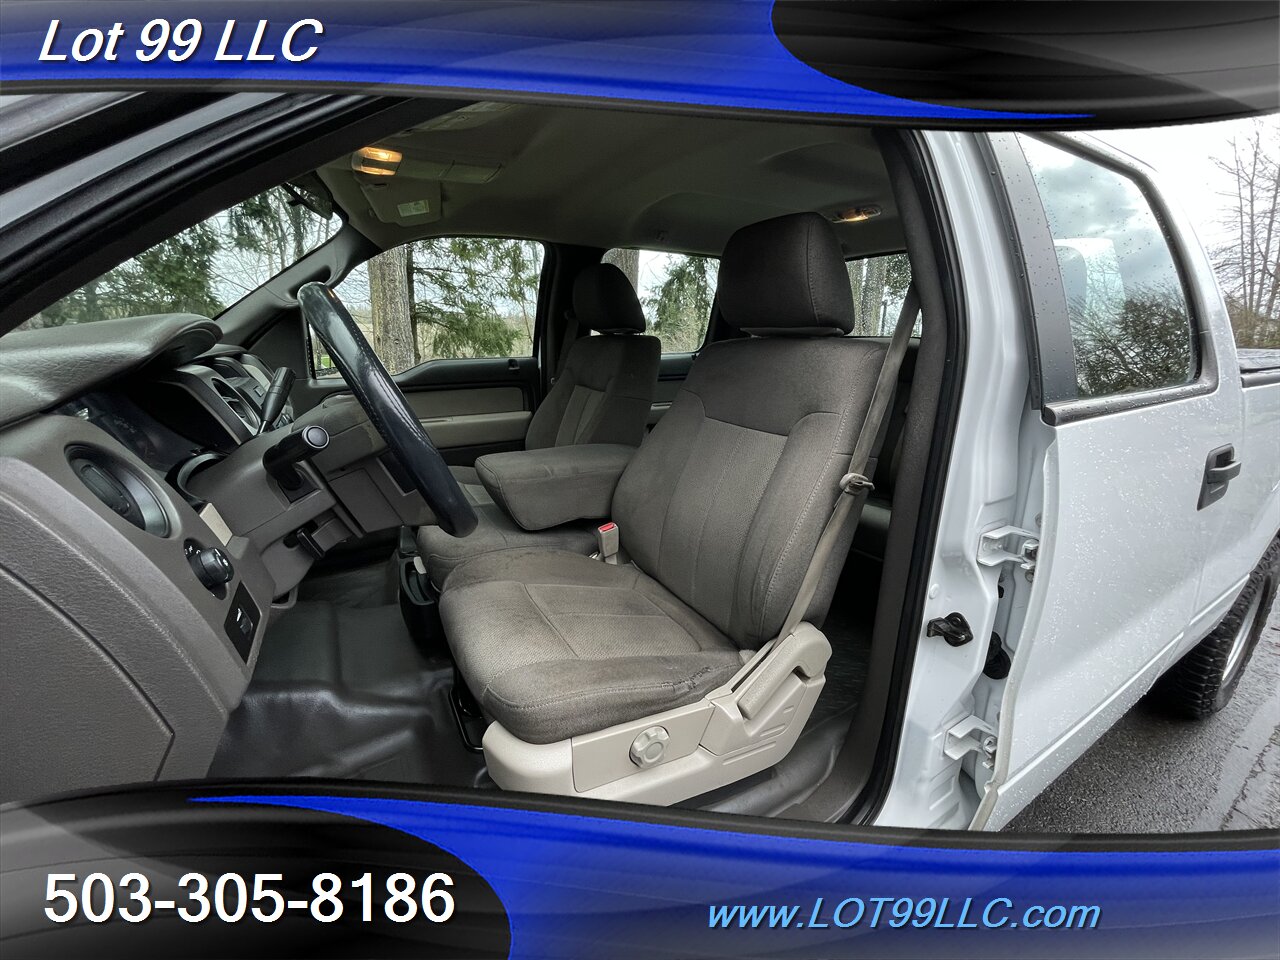 2010 Ford F-150 XL SuperCrew 4x4 6.5 Bed  4.6L 3V V8 292hp   - Photo 13 - Milwaukie, OR 97267